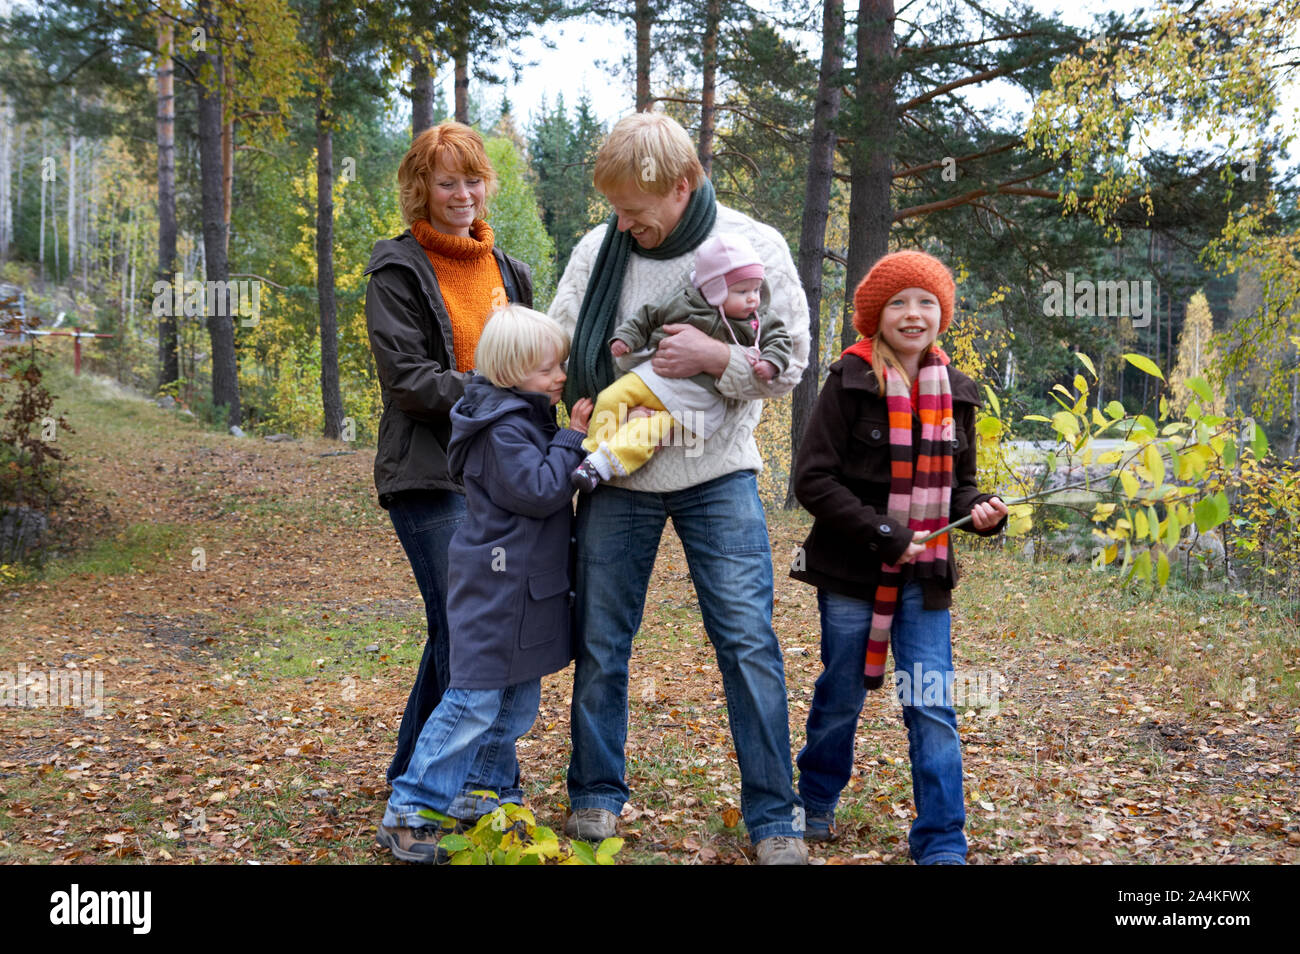 Family in forest Stock Photo